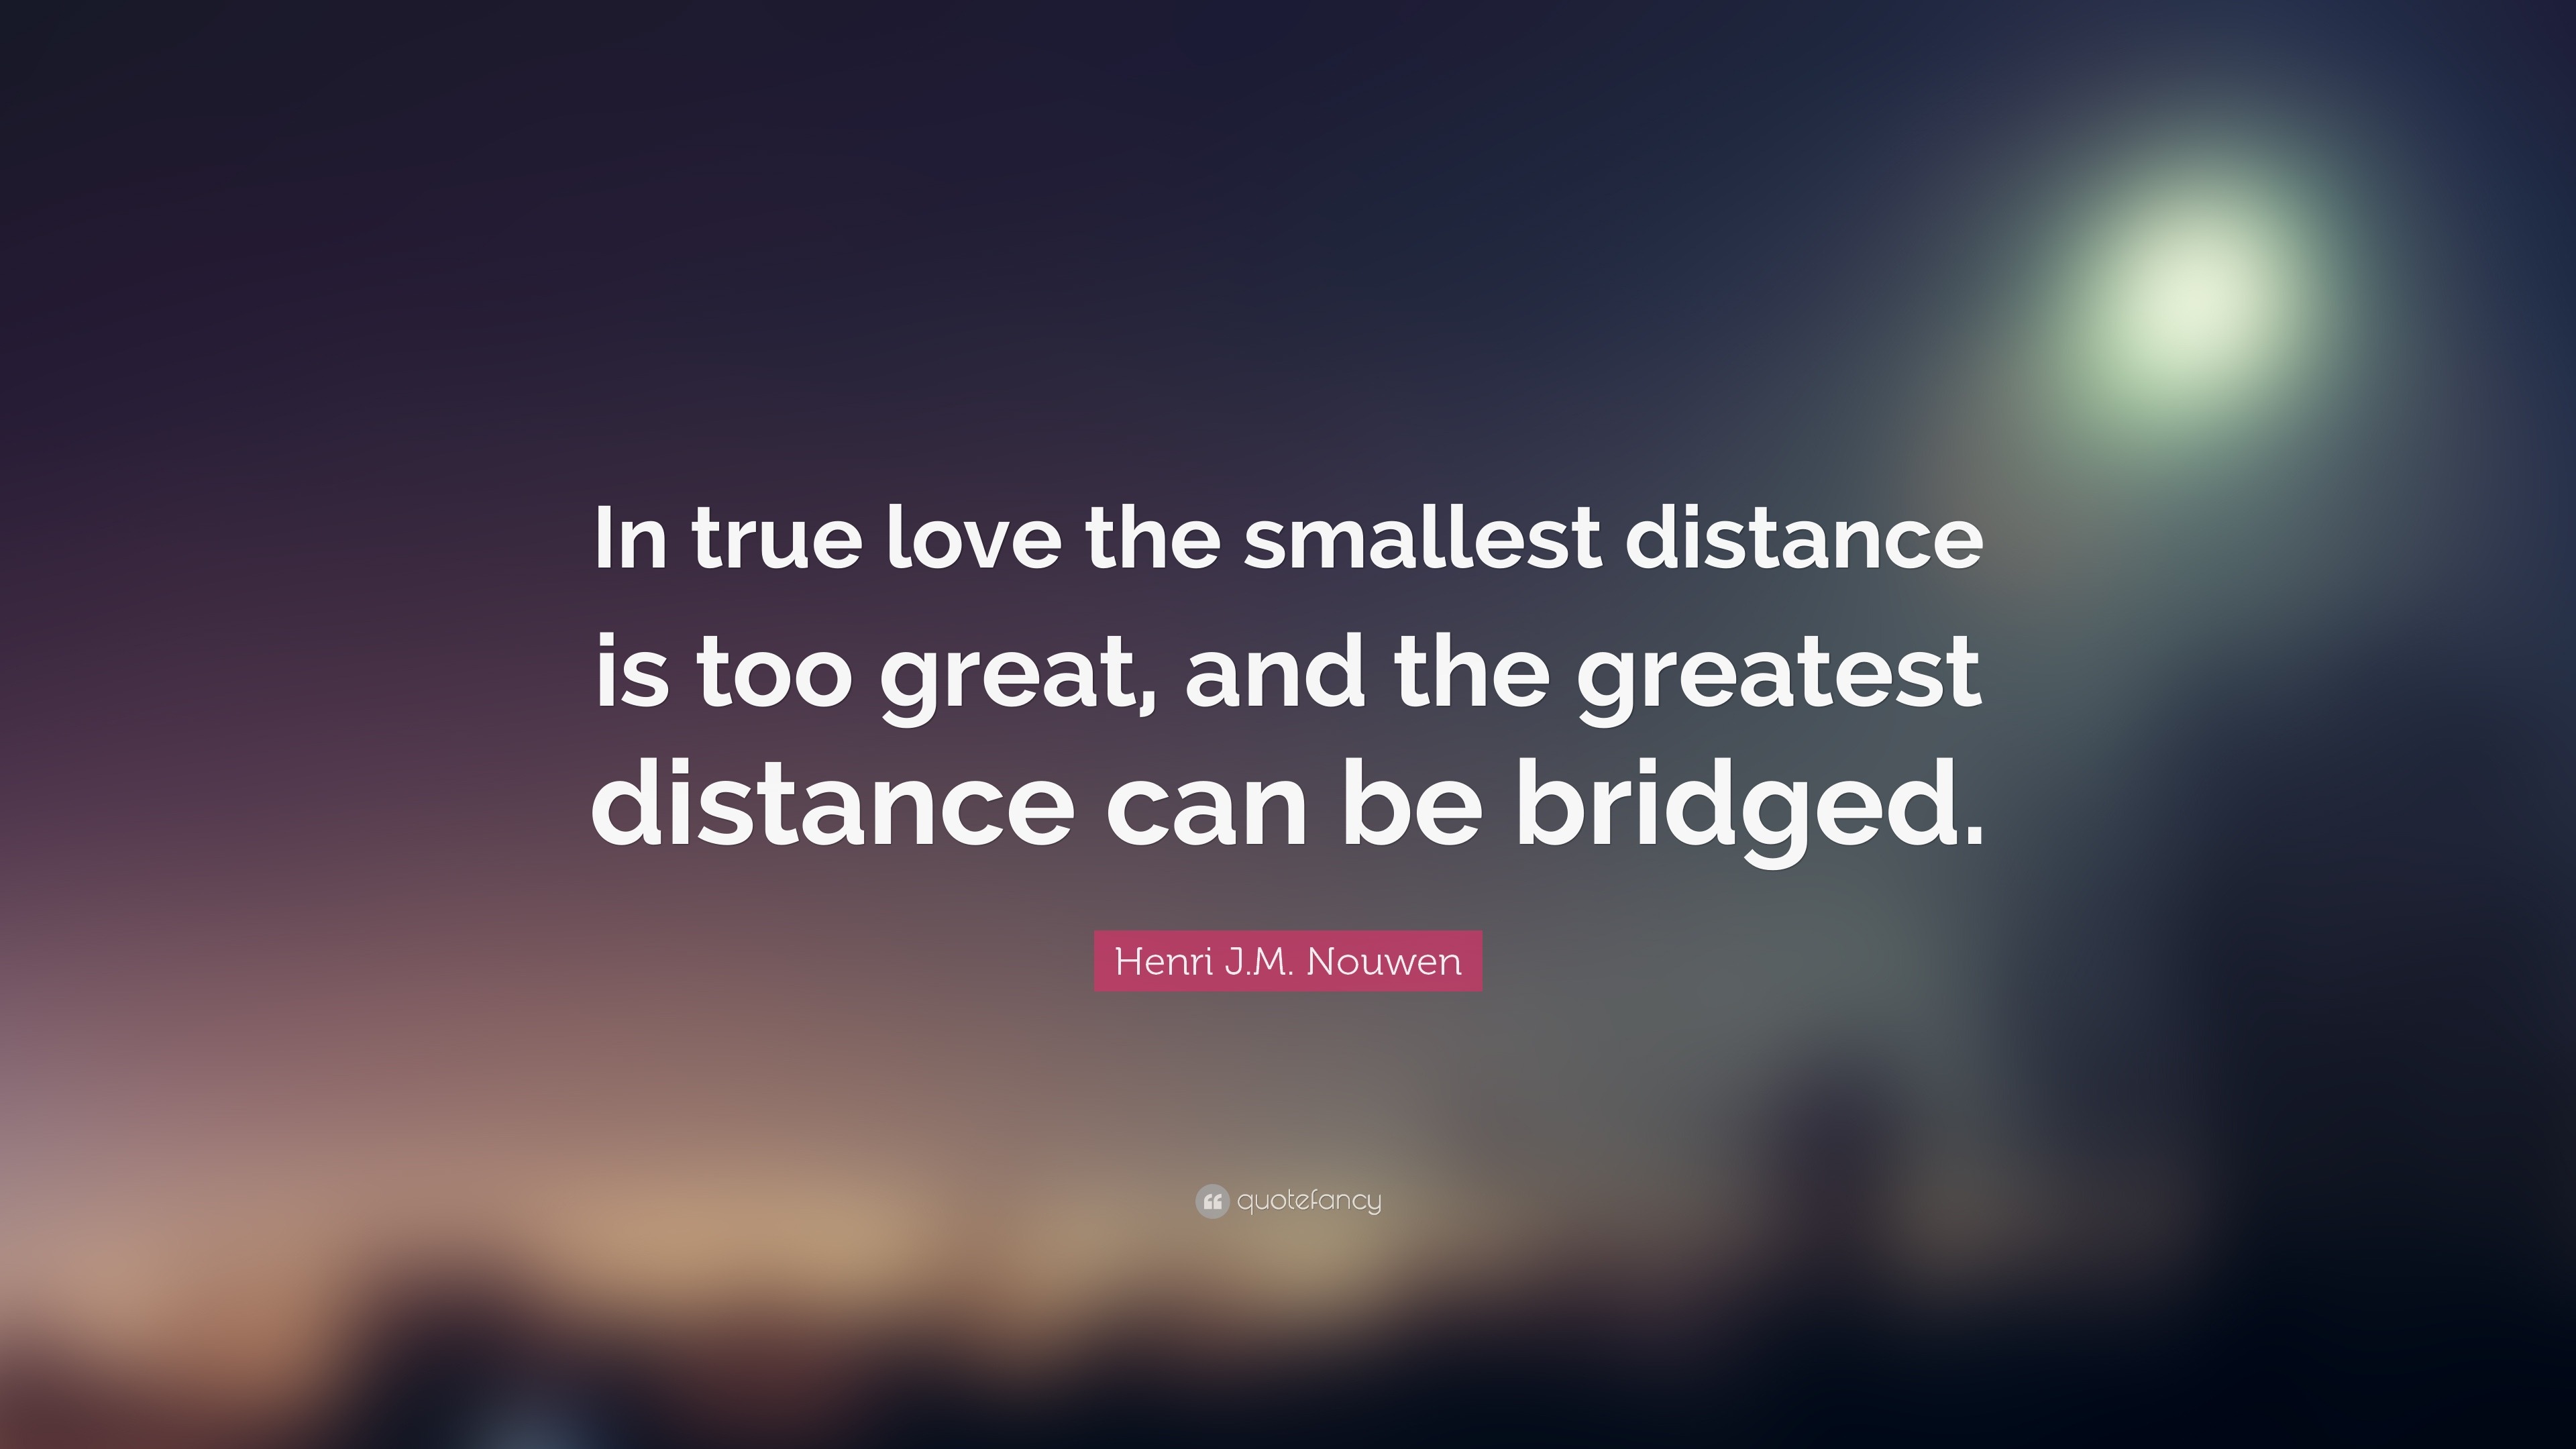 Henri J M Nouwen Quote “In true love the smallest distance is too great